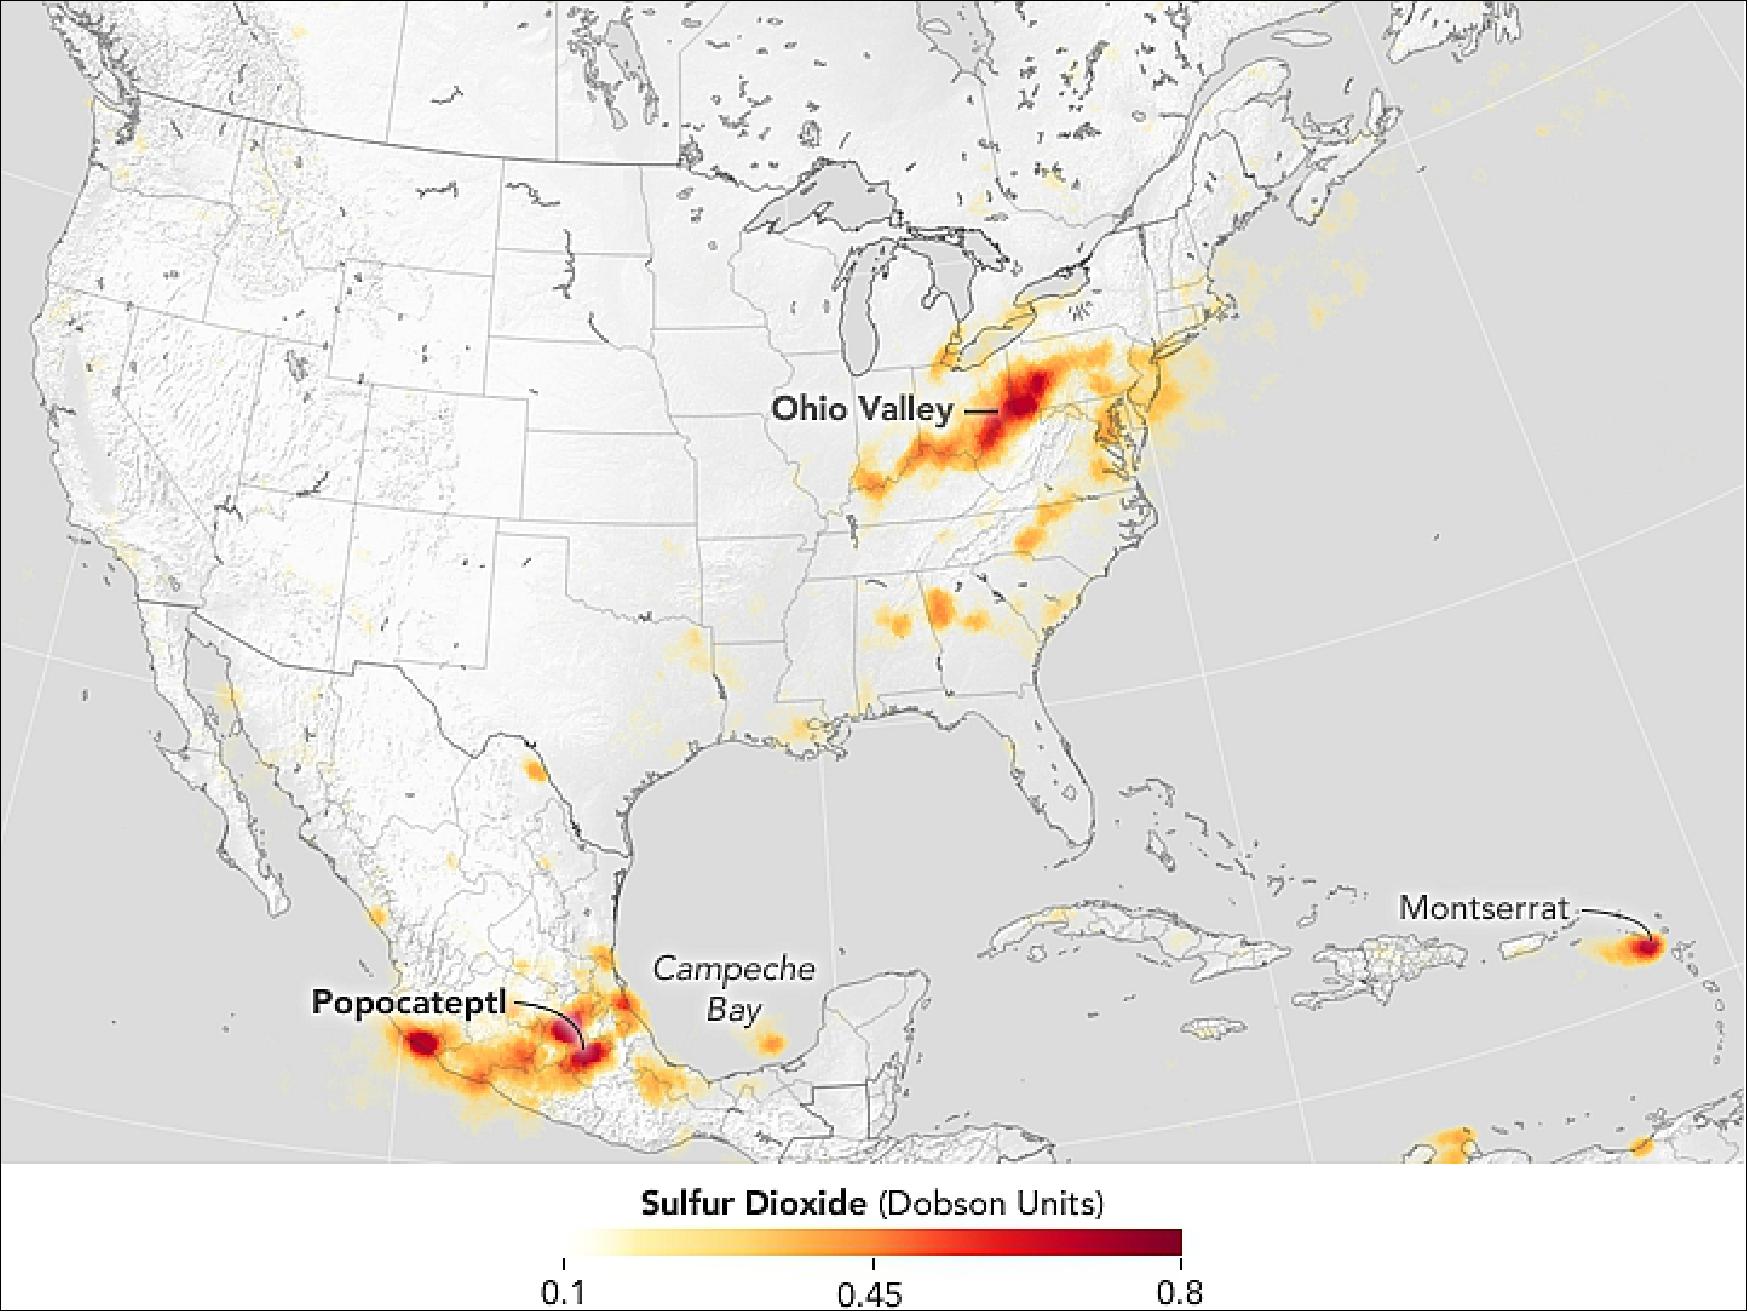 Figure 37: Sulfur Dioxide emissions in North America observed by OMI on NASA's Aura satellite in 2005 (image credit: NASA Earth Observatory, image by Jesse Allen, story by Adam Voiland)